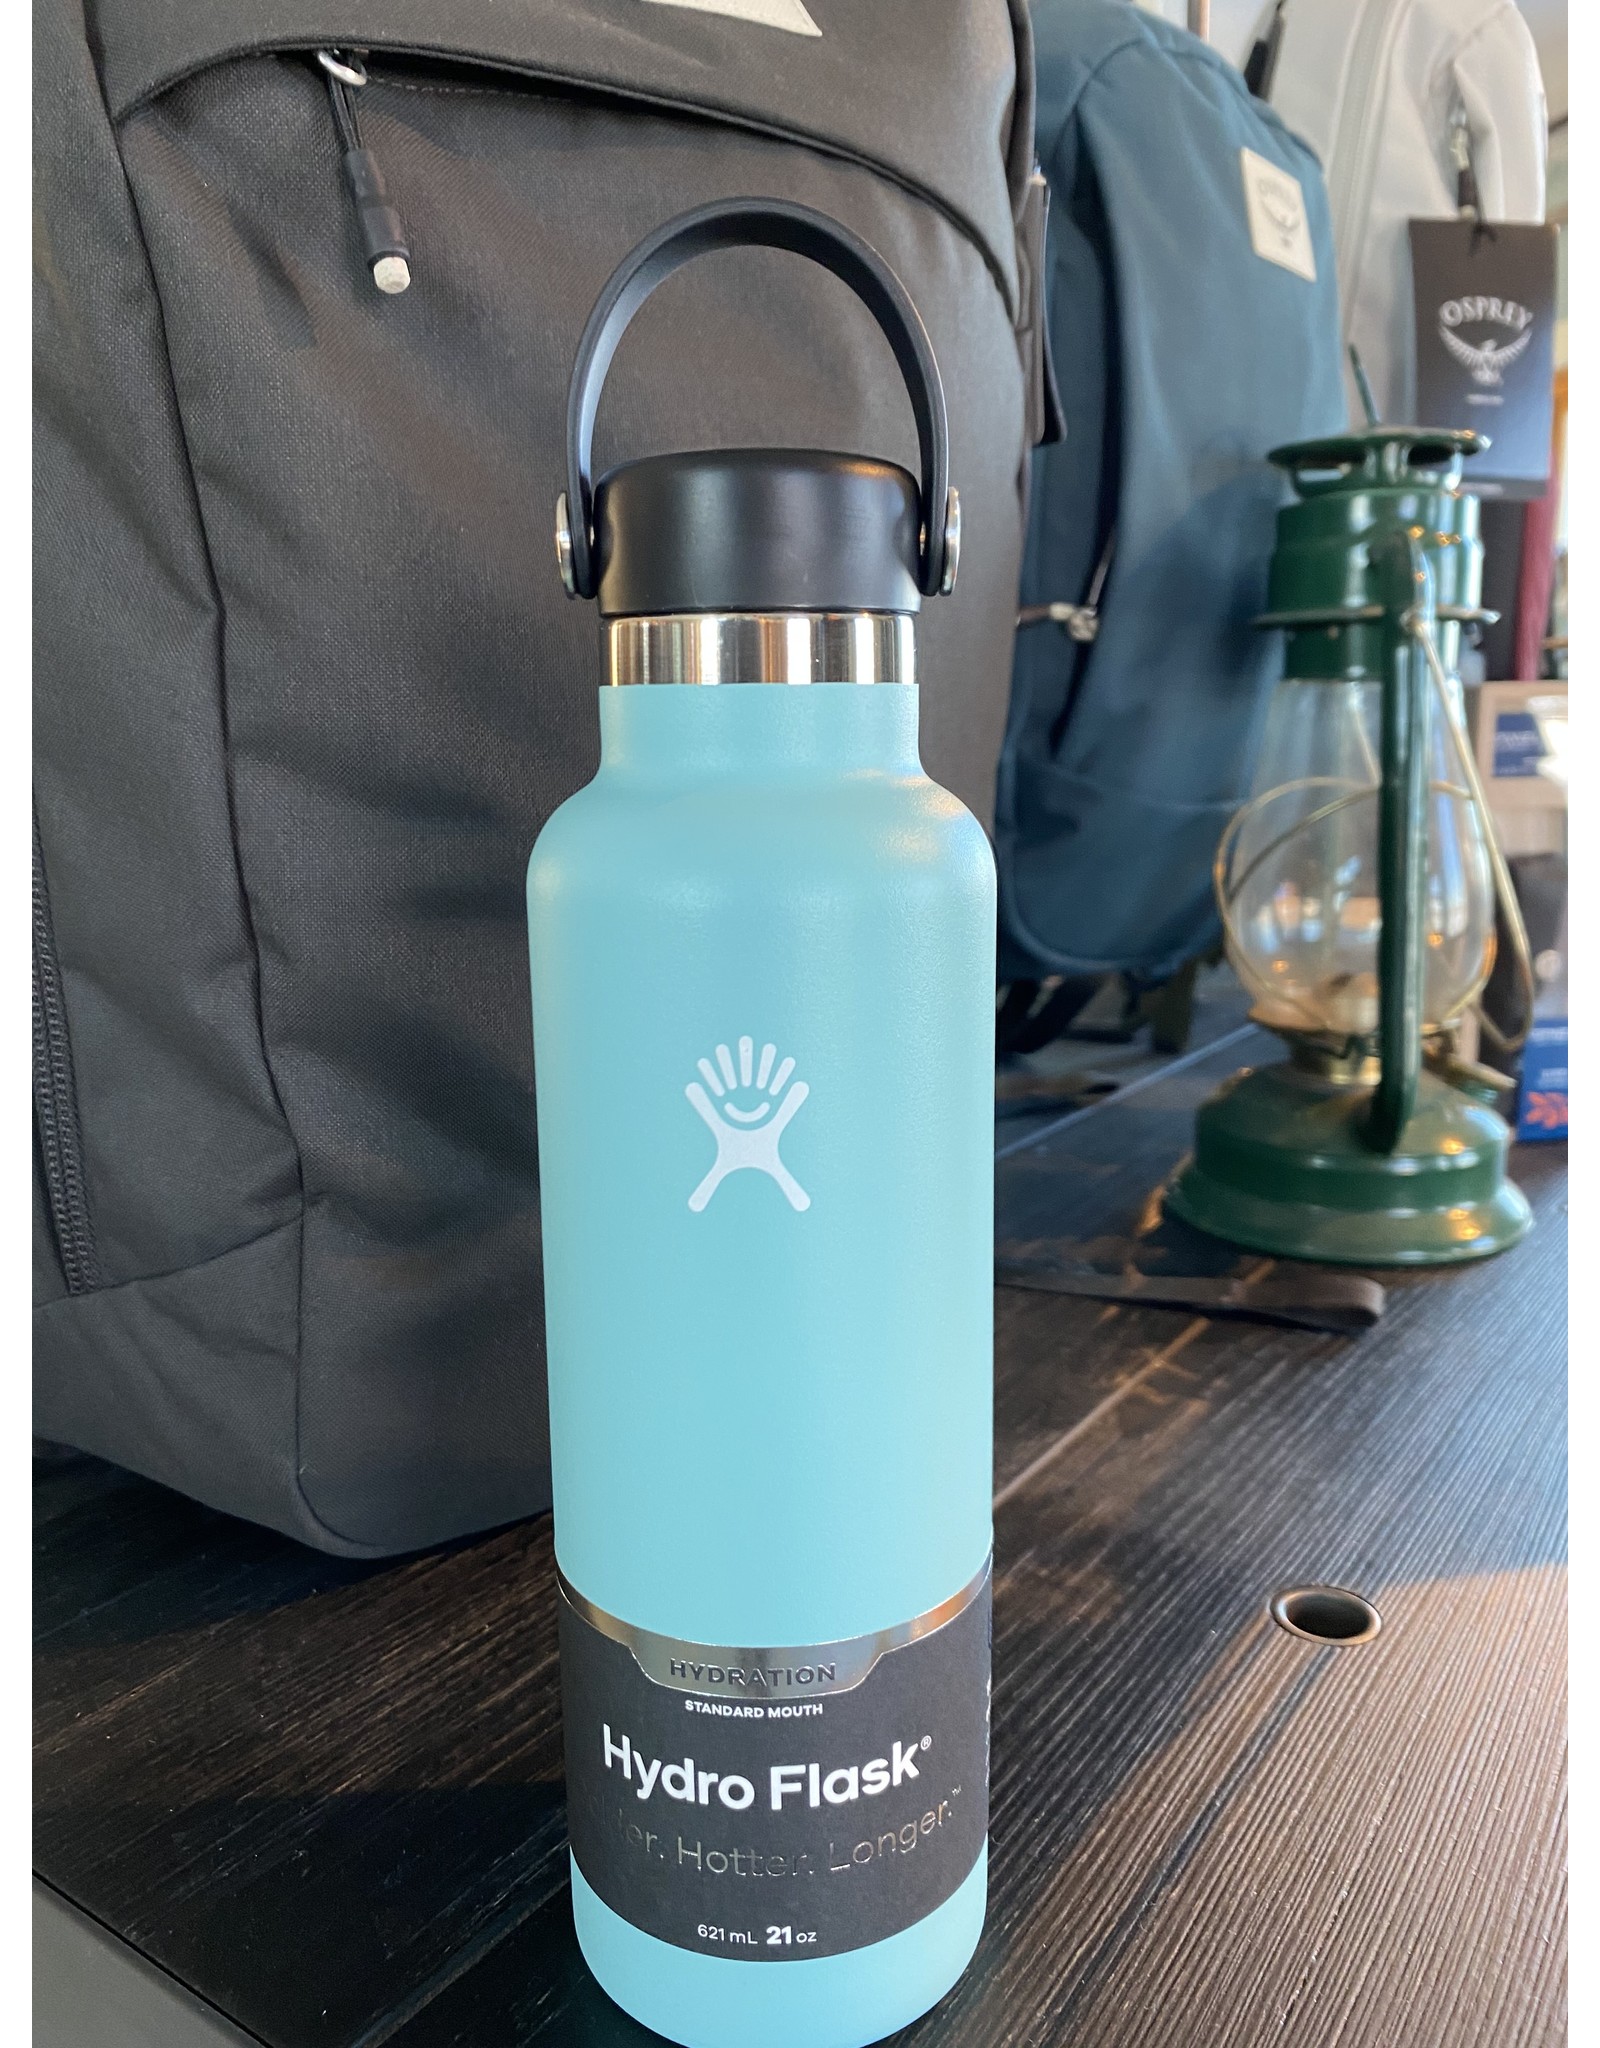 Hydro Flask Bottle, Standard Mouth, Pacific, 21 Ounce